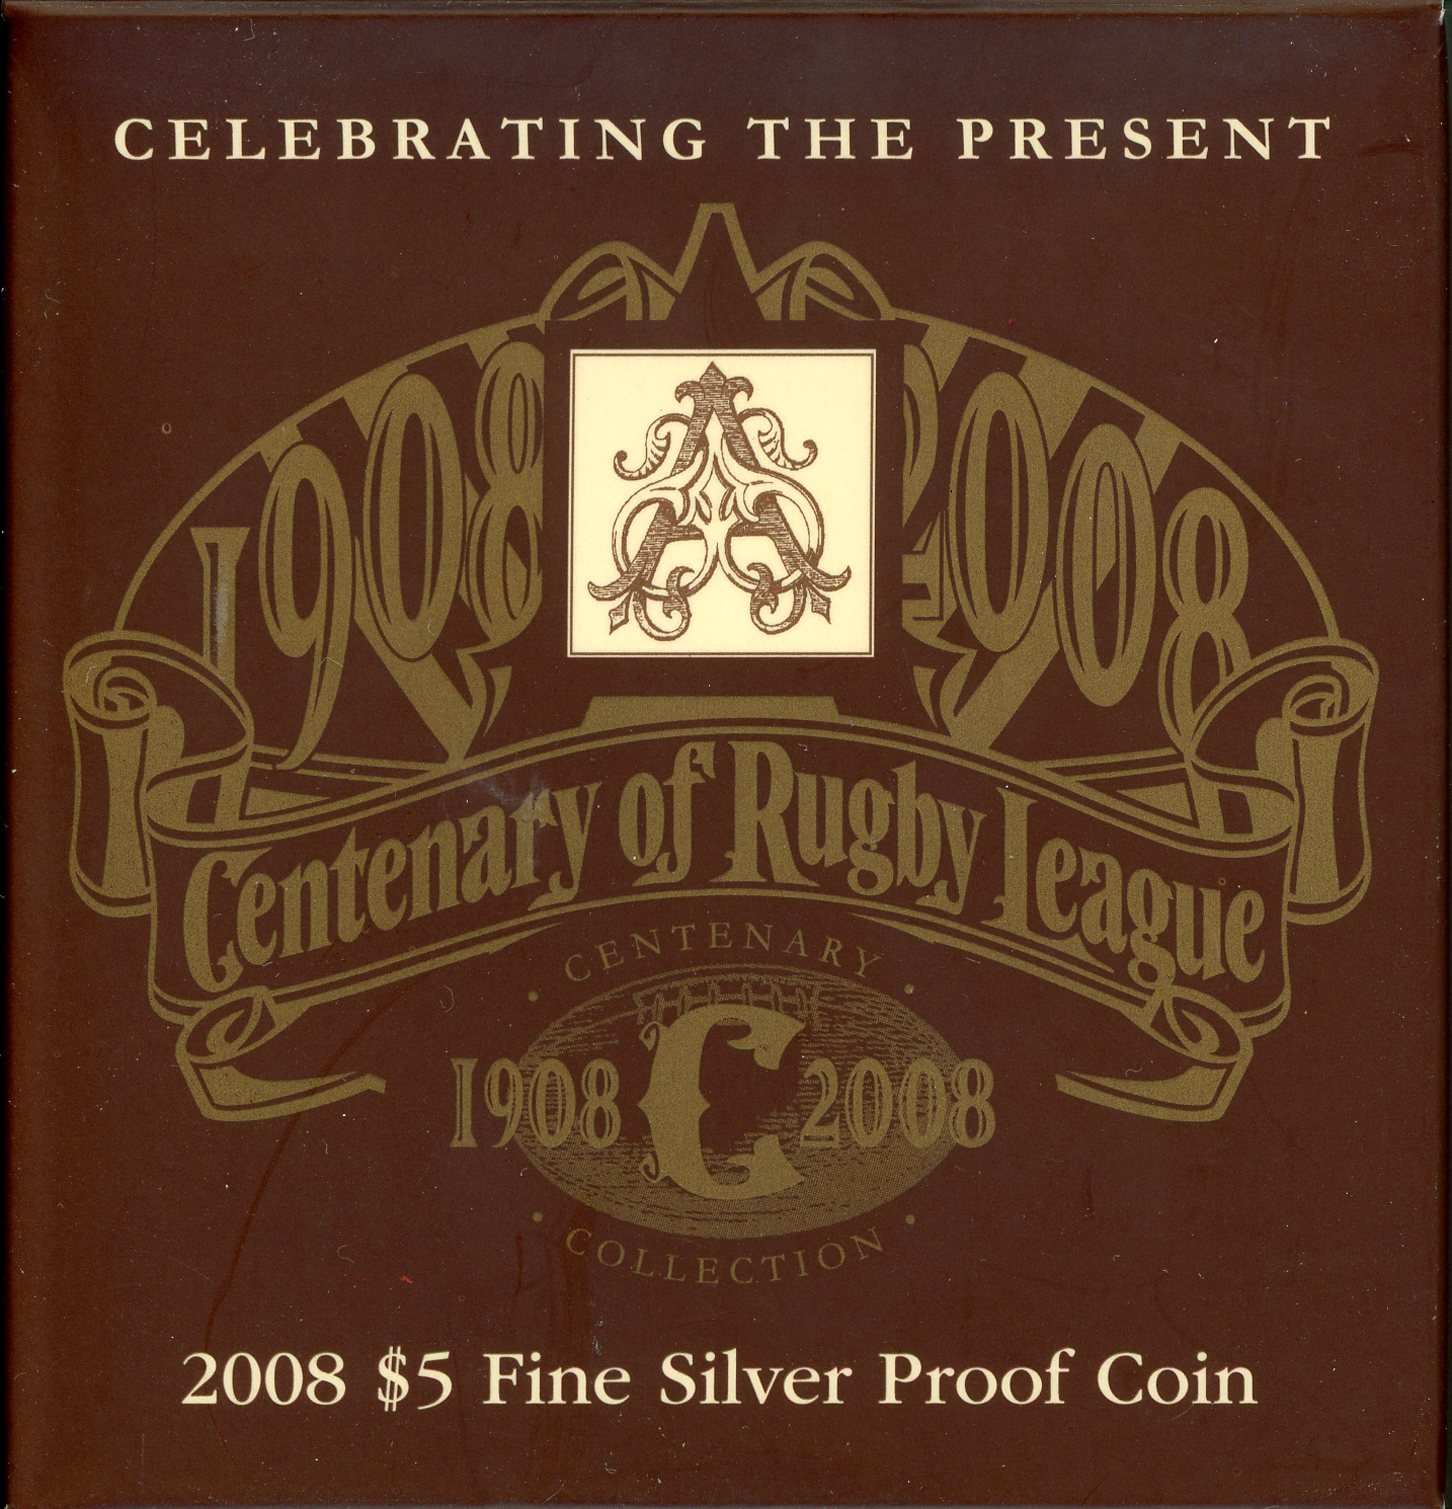 Thumbnail for 2008 Centenary of Rugby League $5 Proof